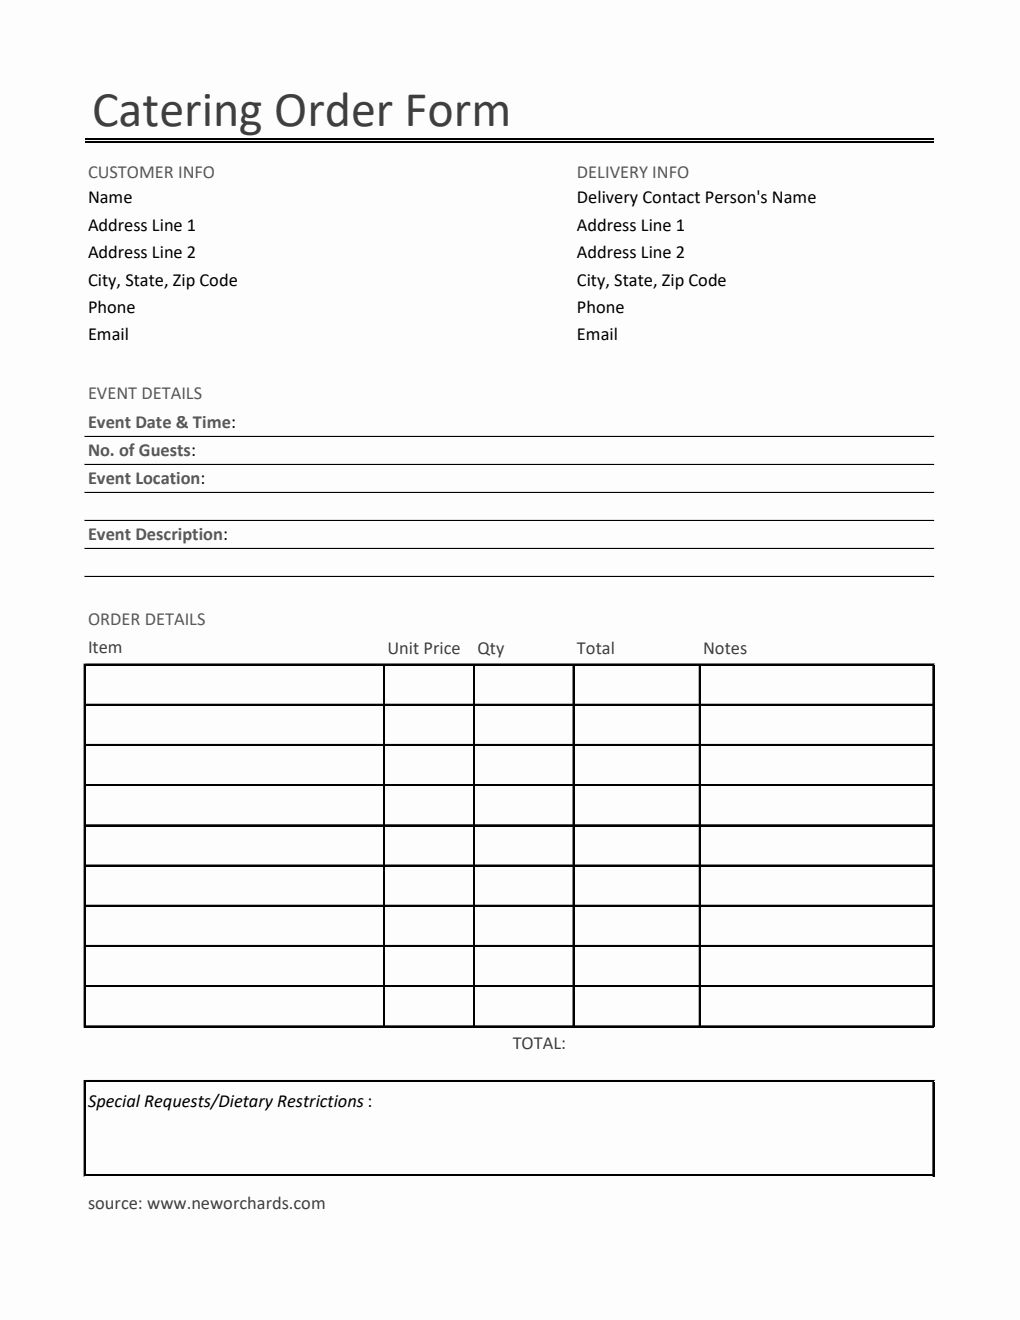 Printable Catering Order Form Template in Excel